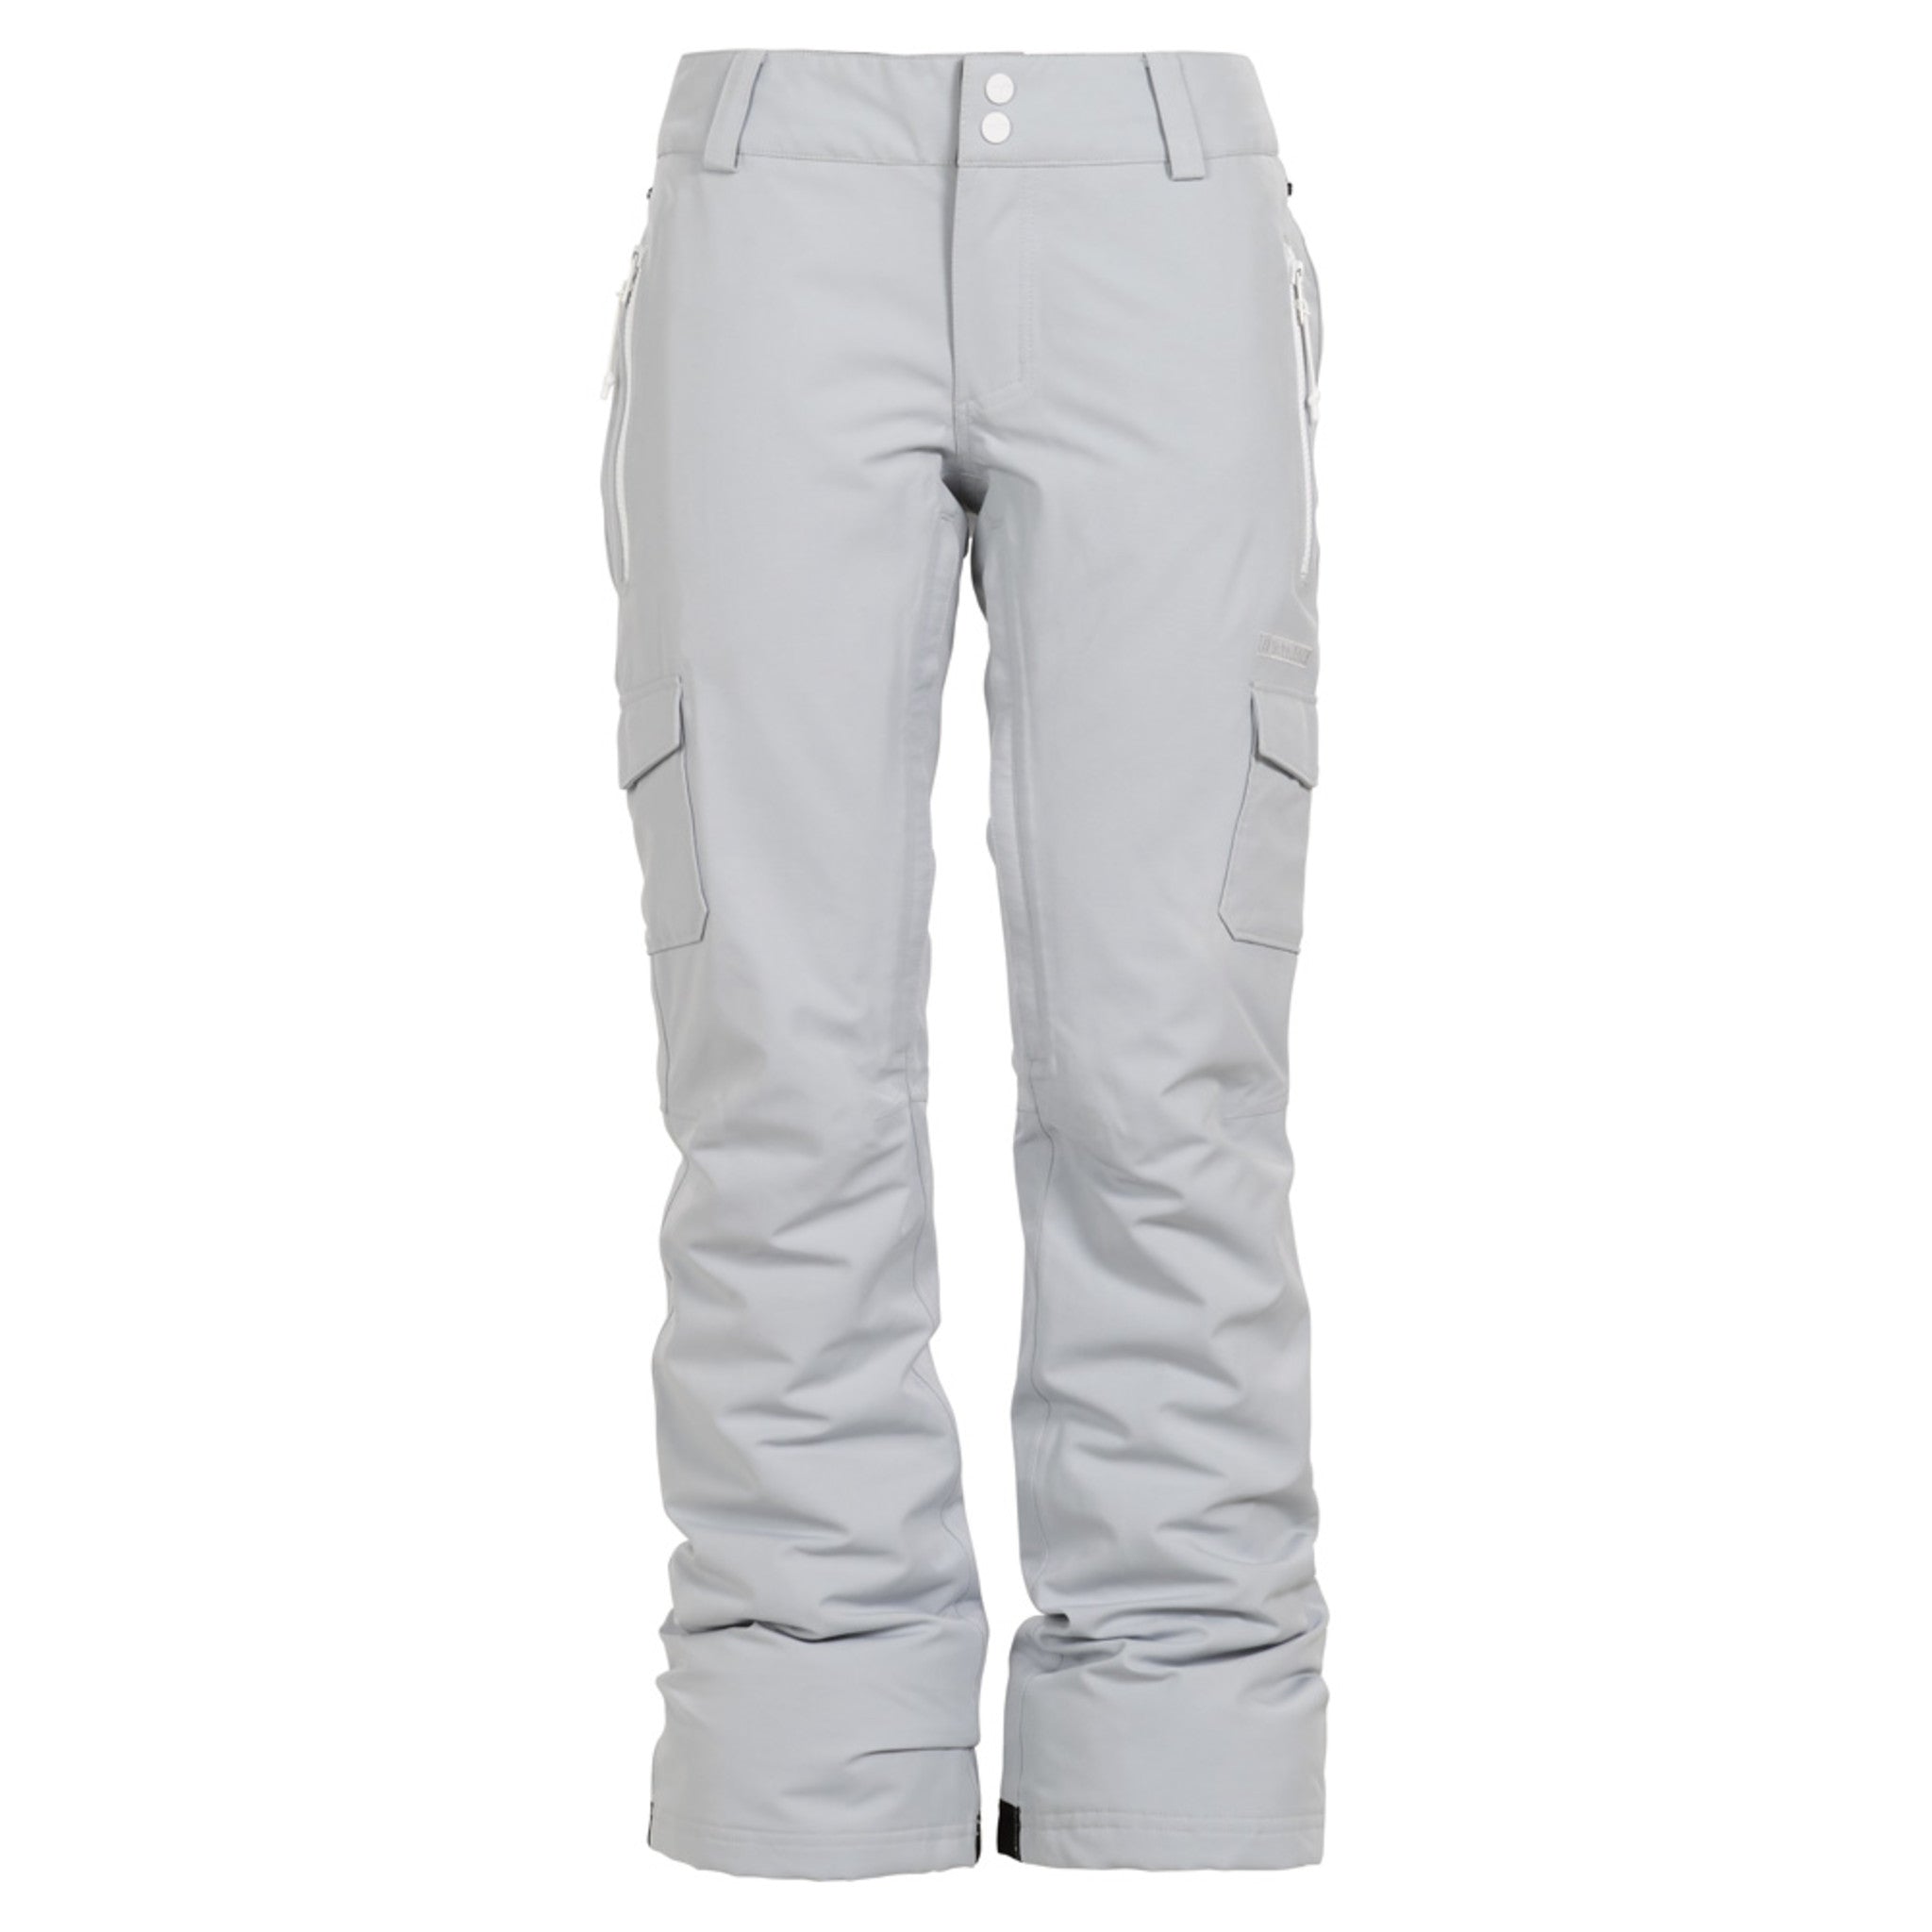 Women's Insulated Pants On Sale